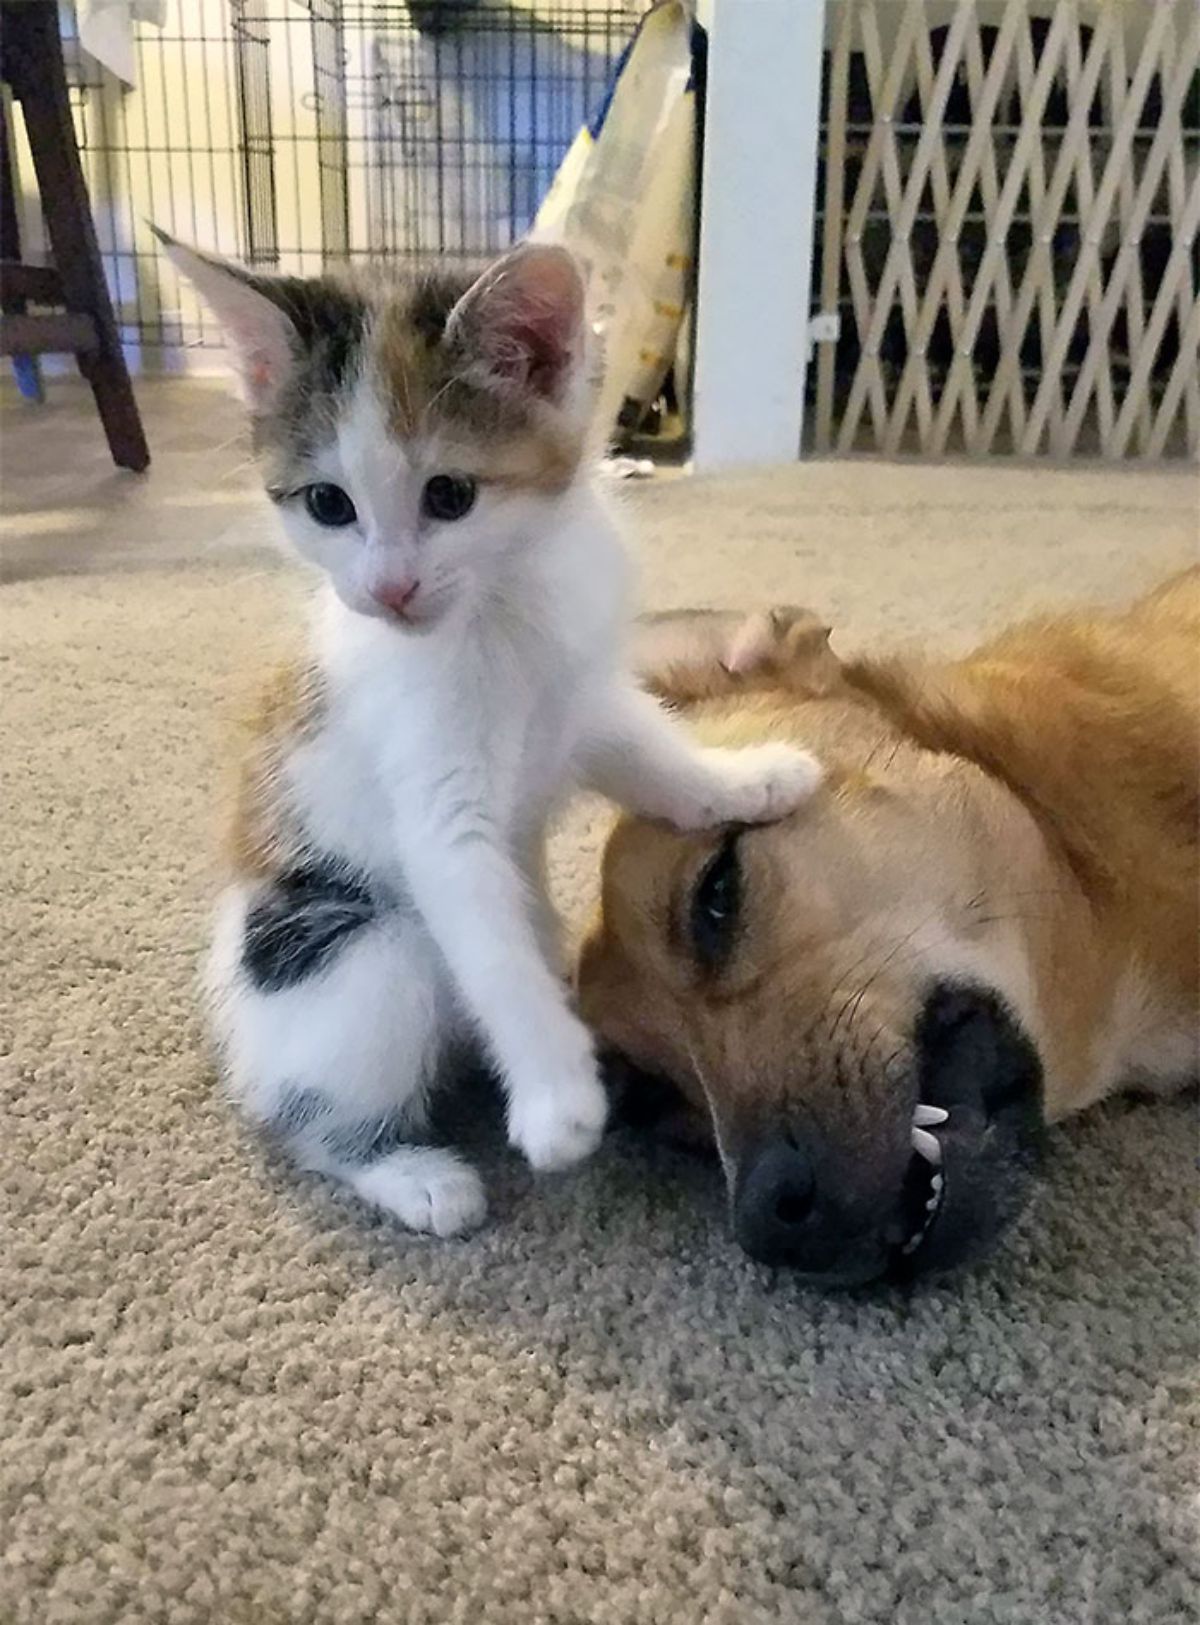 white orange and black kitten laying a paw on a brown dog's face and the dog is snarling